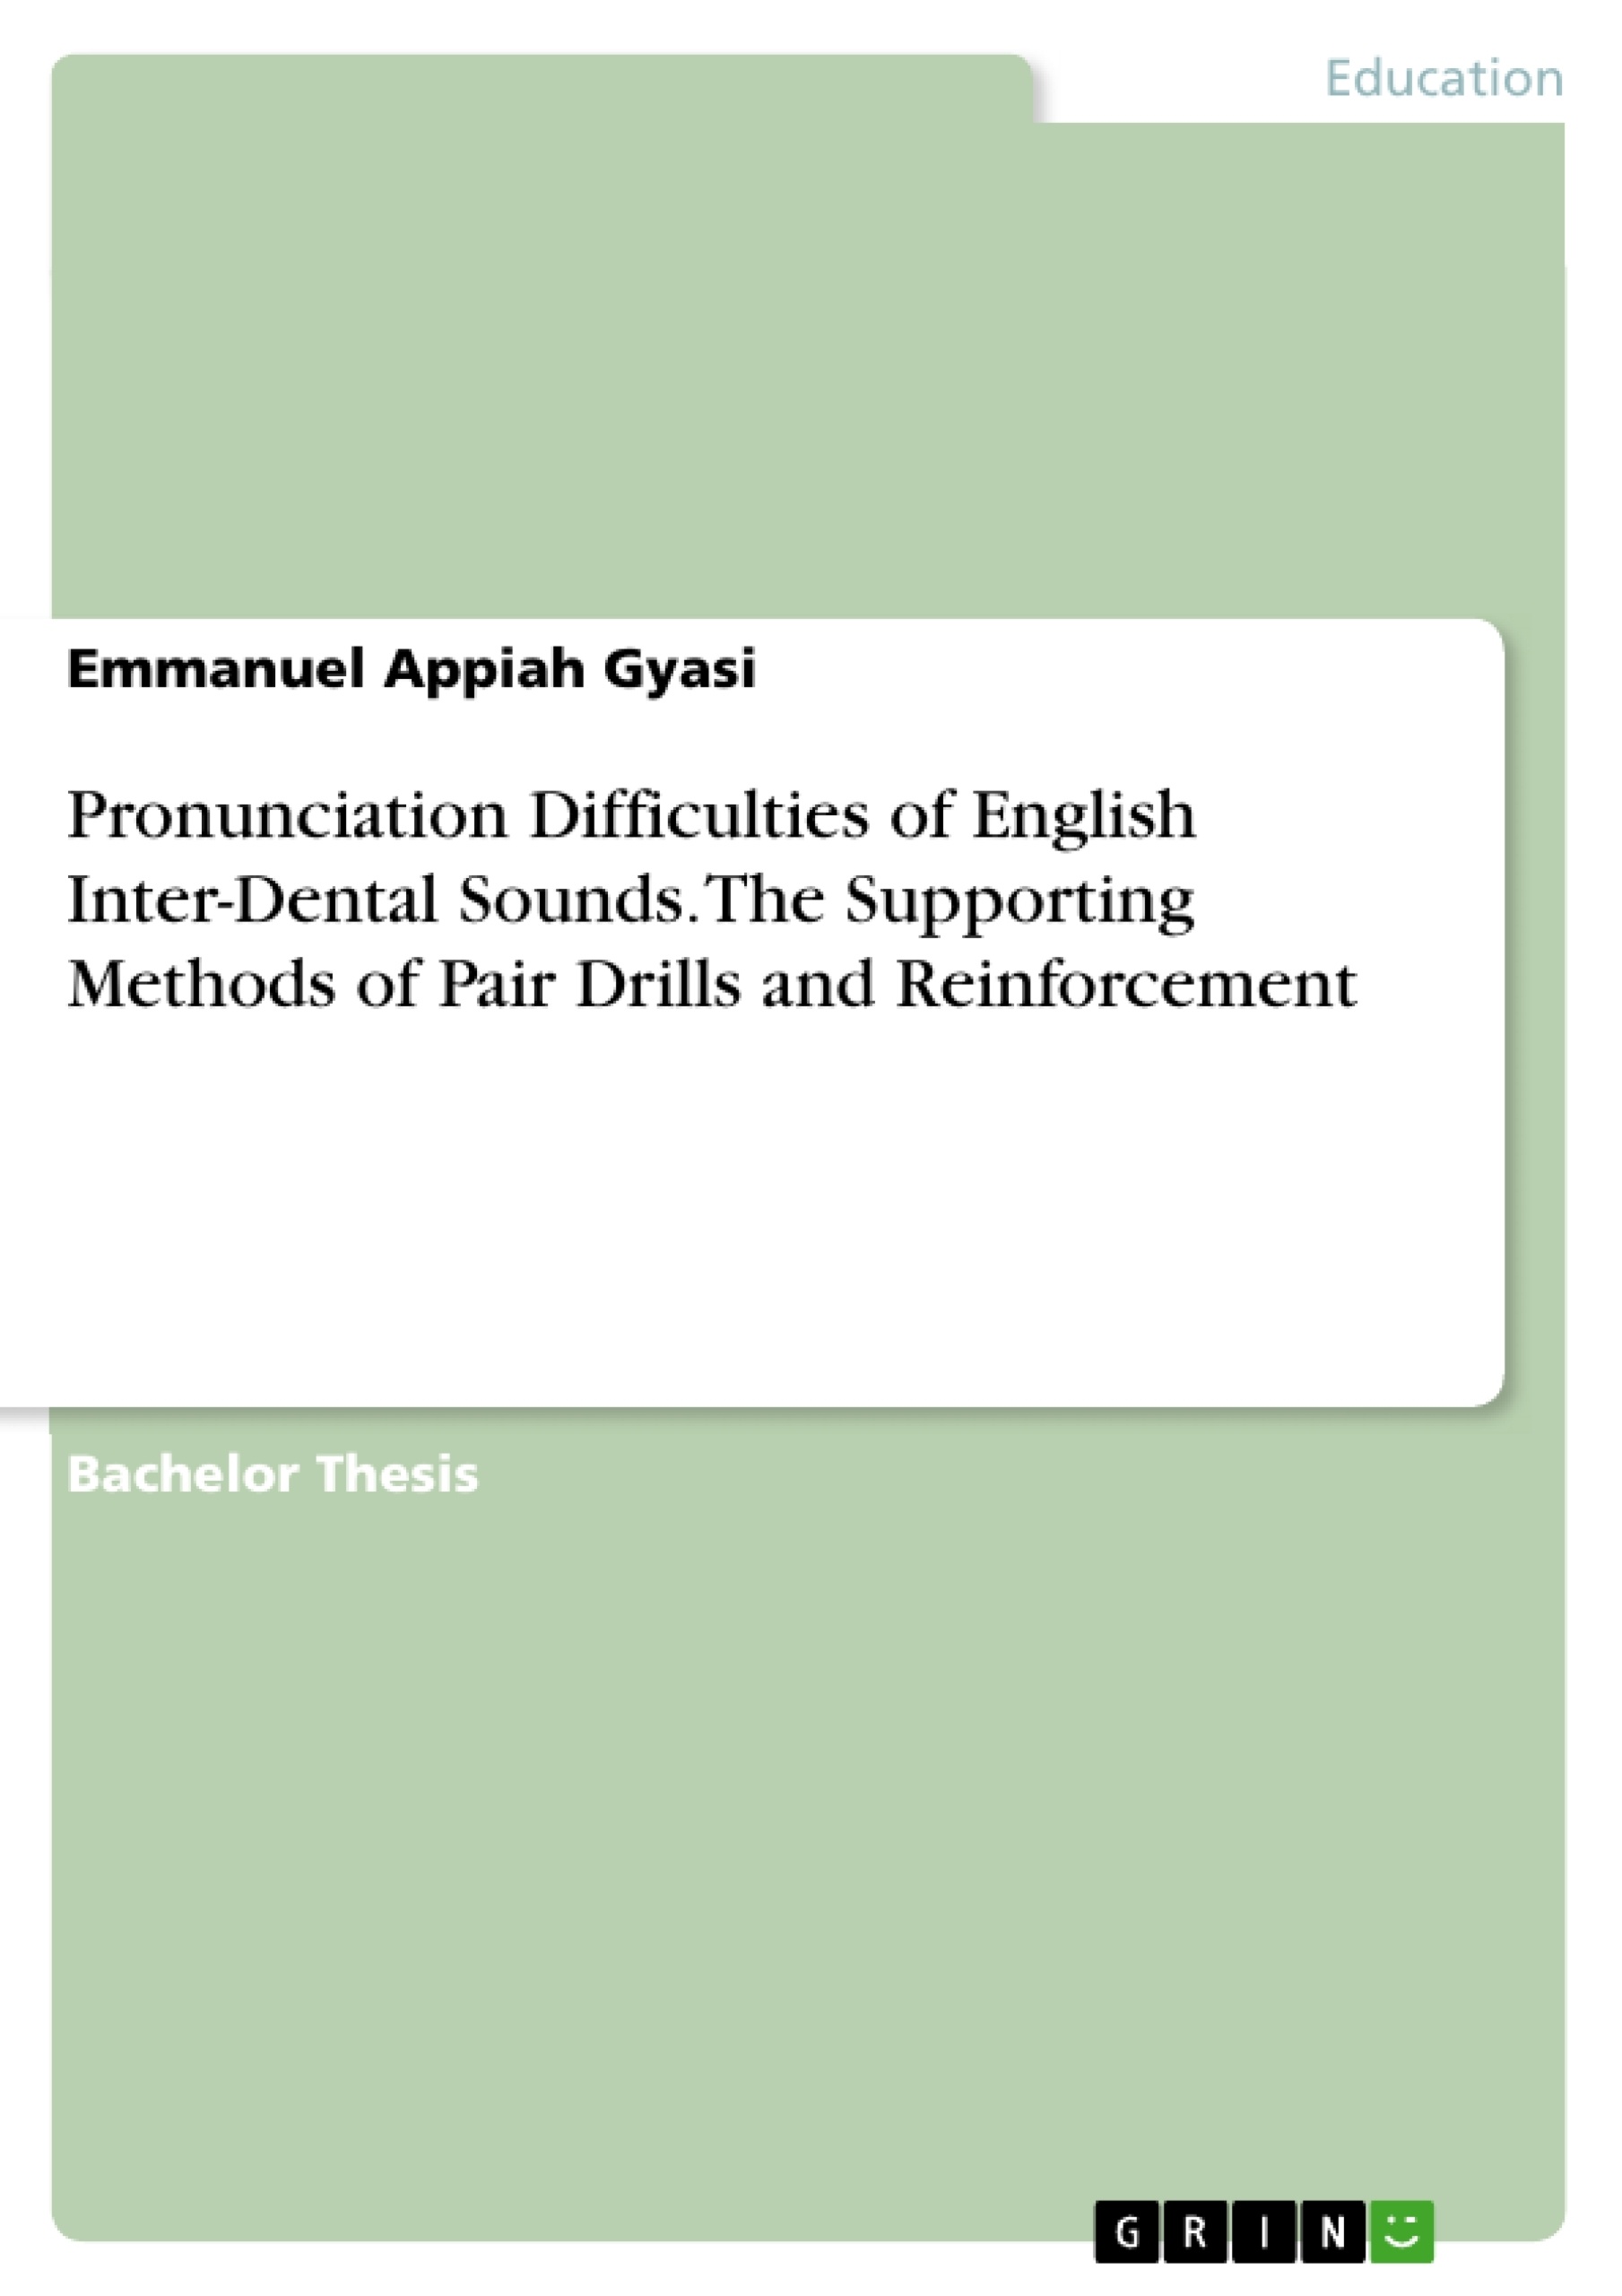 of　Reinforcement　GRIN　The　Drills　Inter-Dental　English　of　Pair　Pronunciation　and　Supporting　Difficulties　Sounds.　Methods